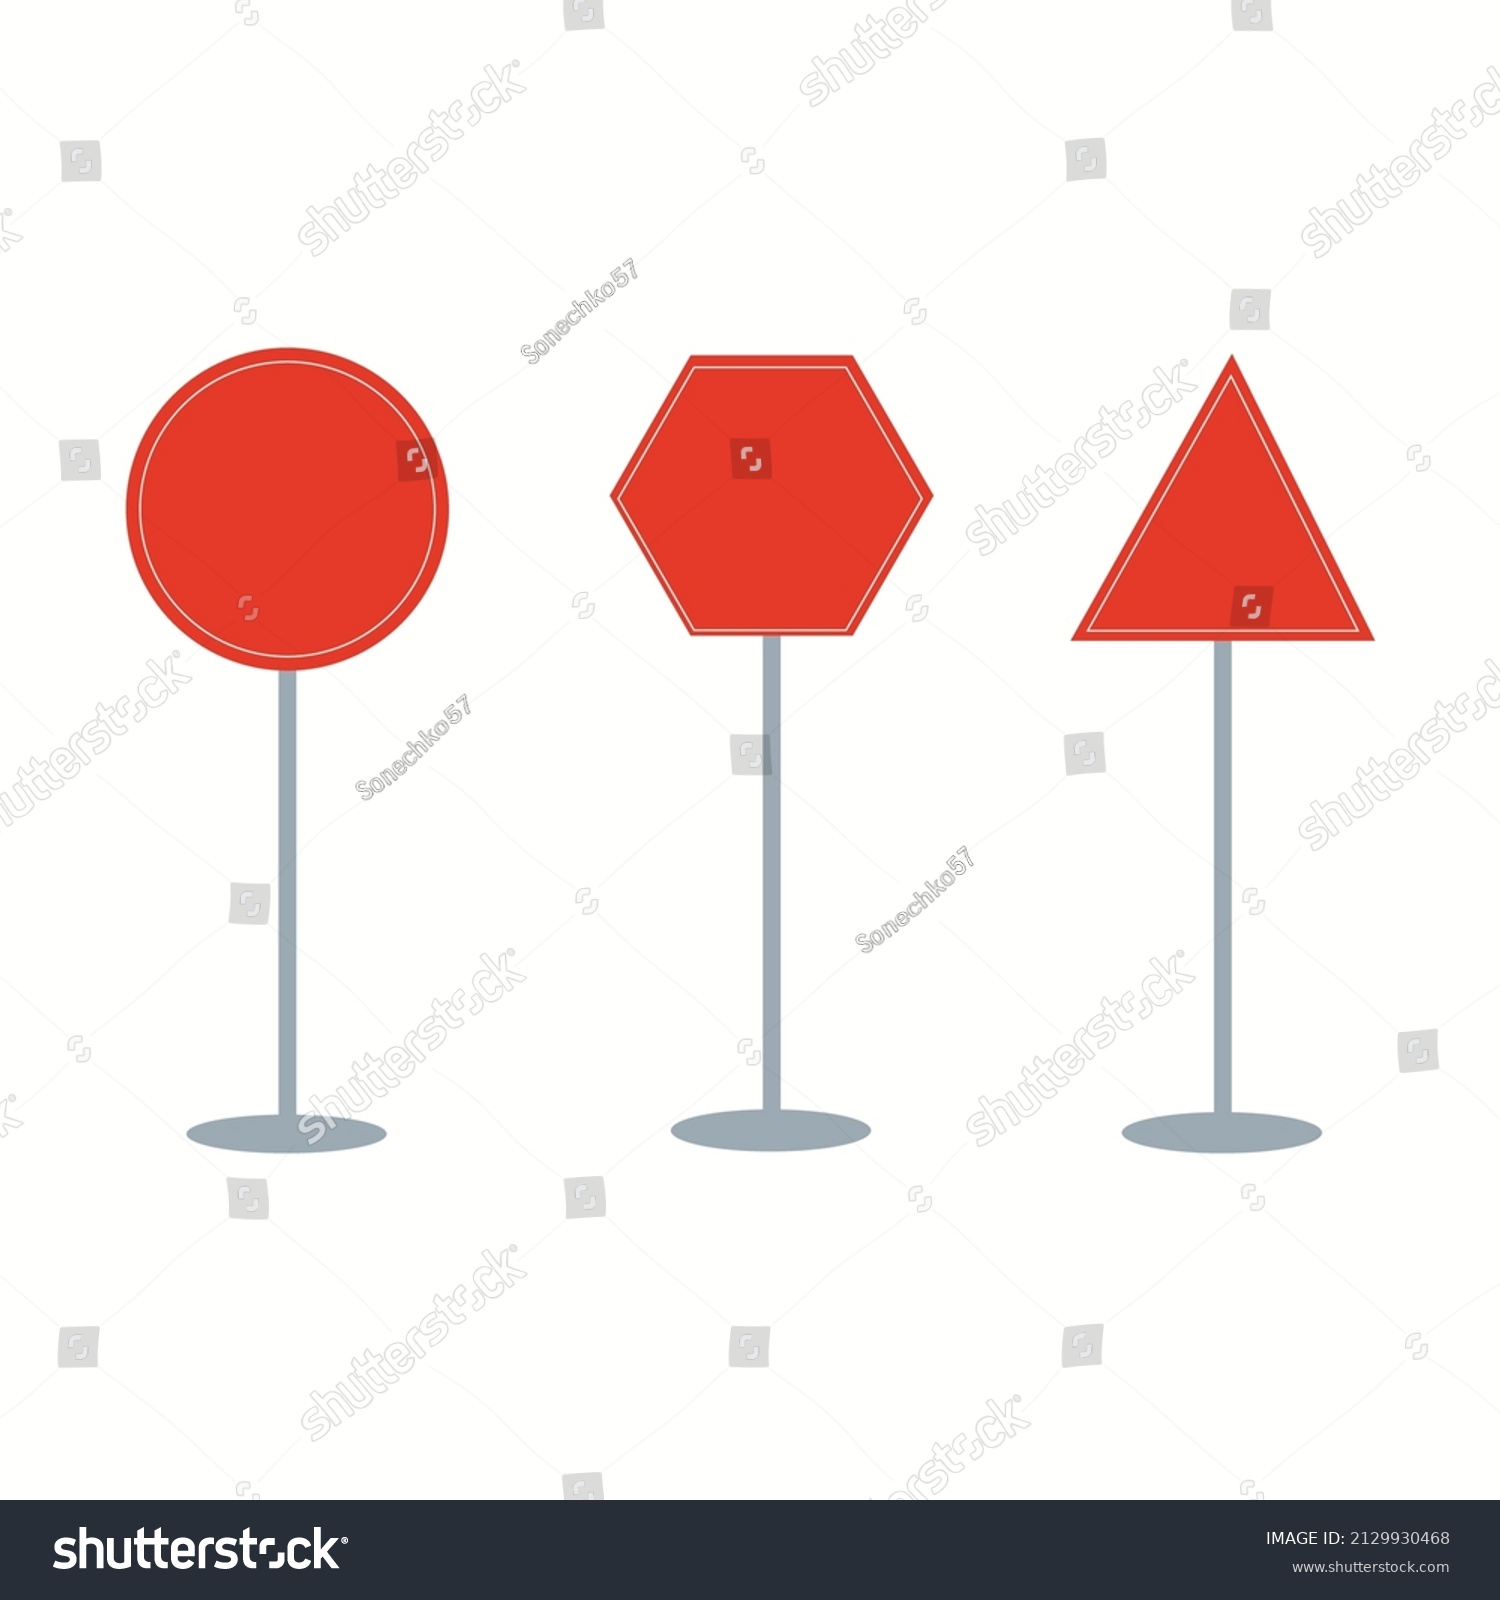 Red Blank Road Signs Banner Design Stock Vector Royalty Free